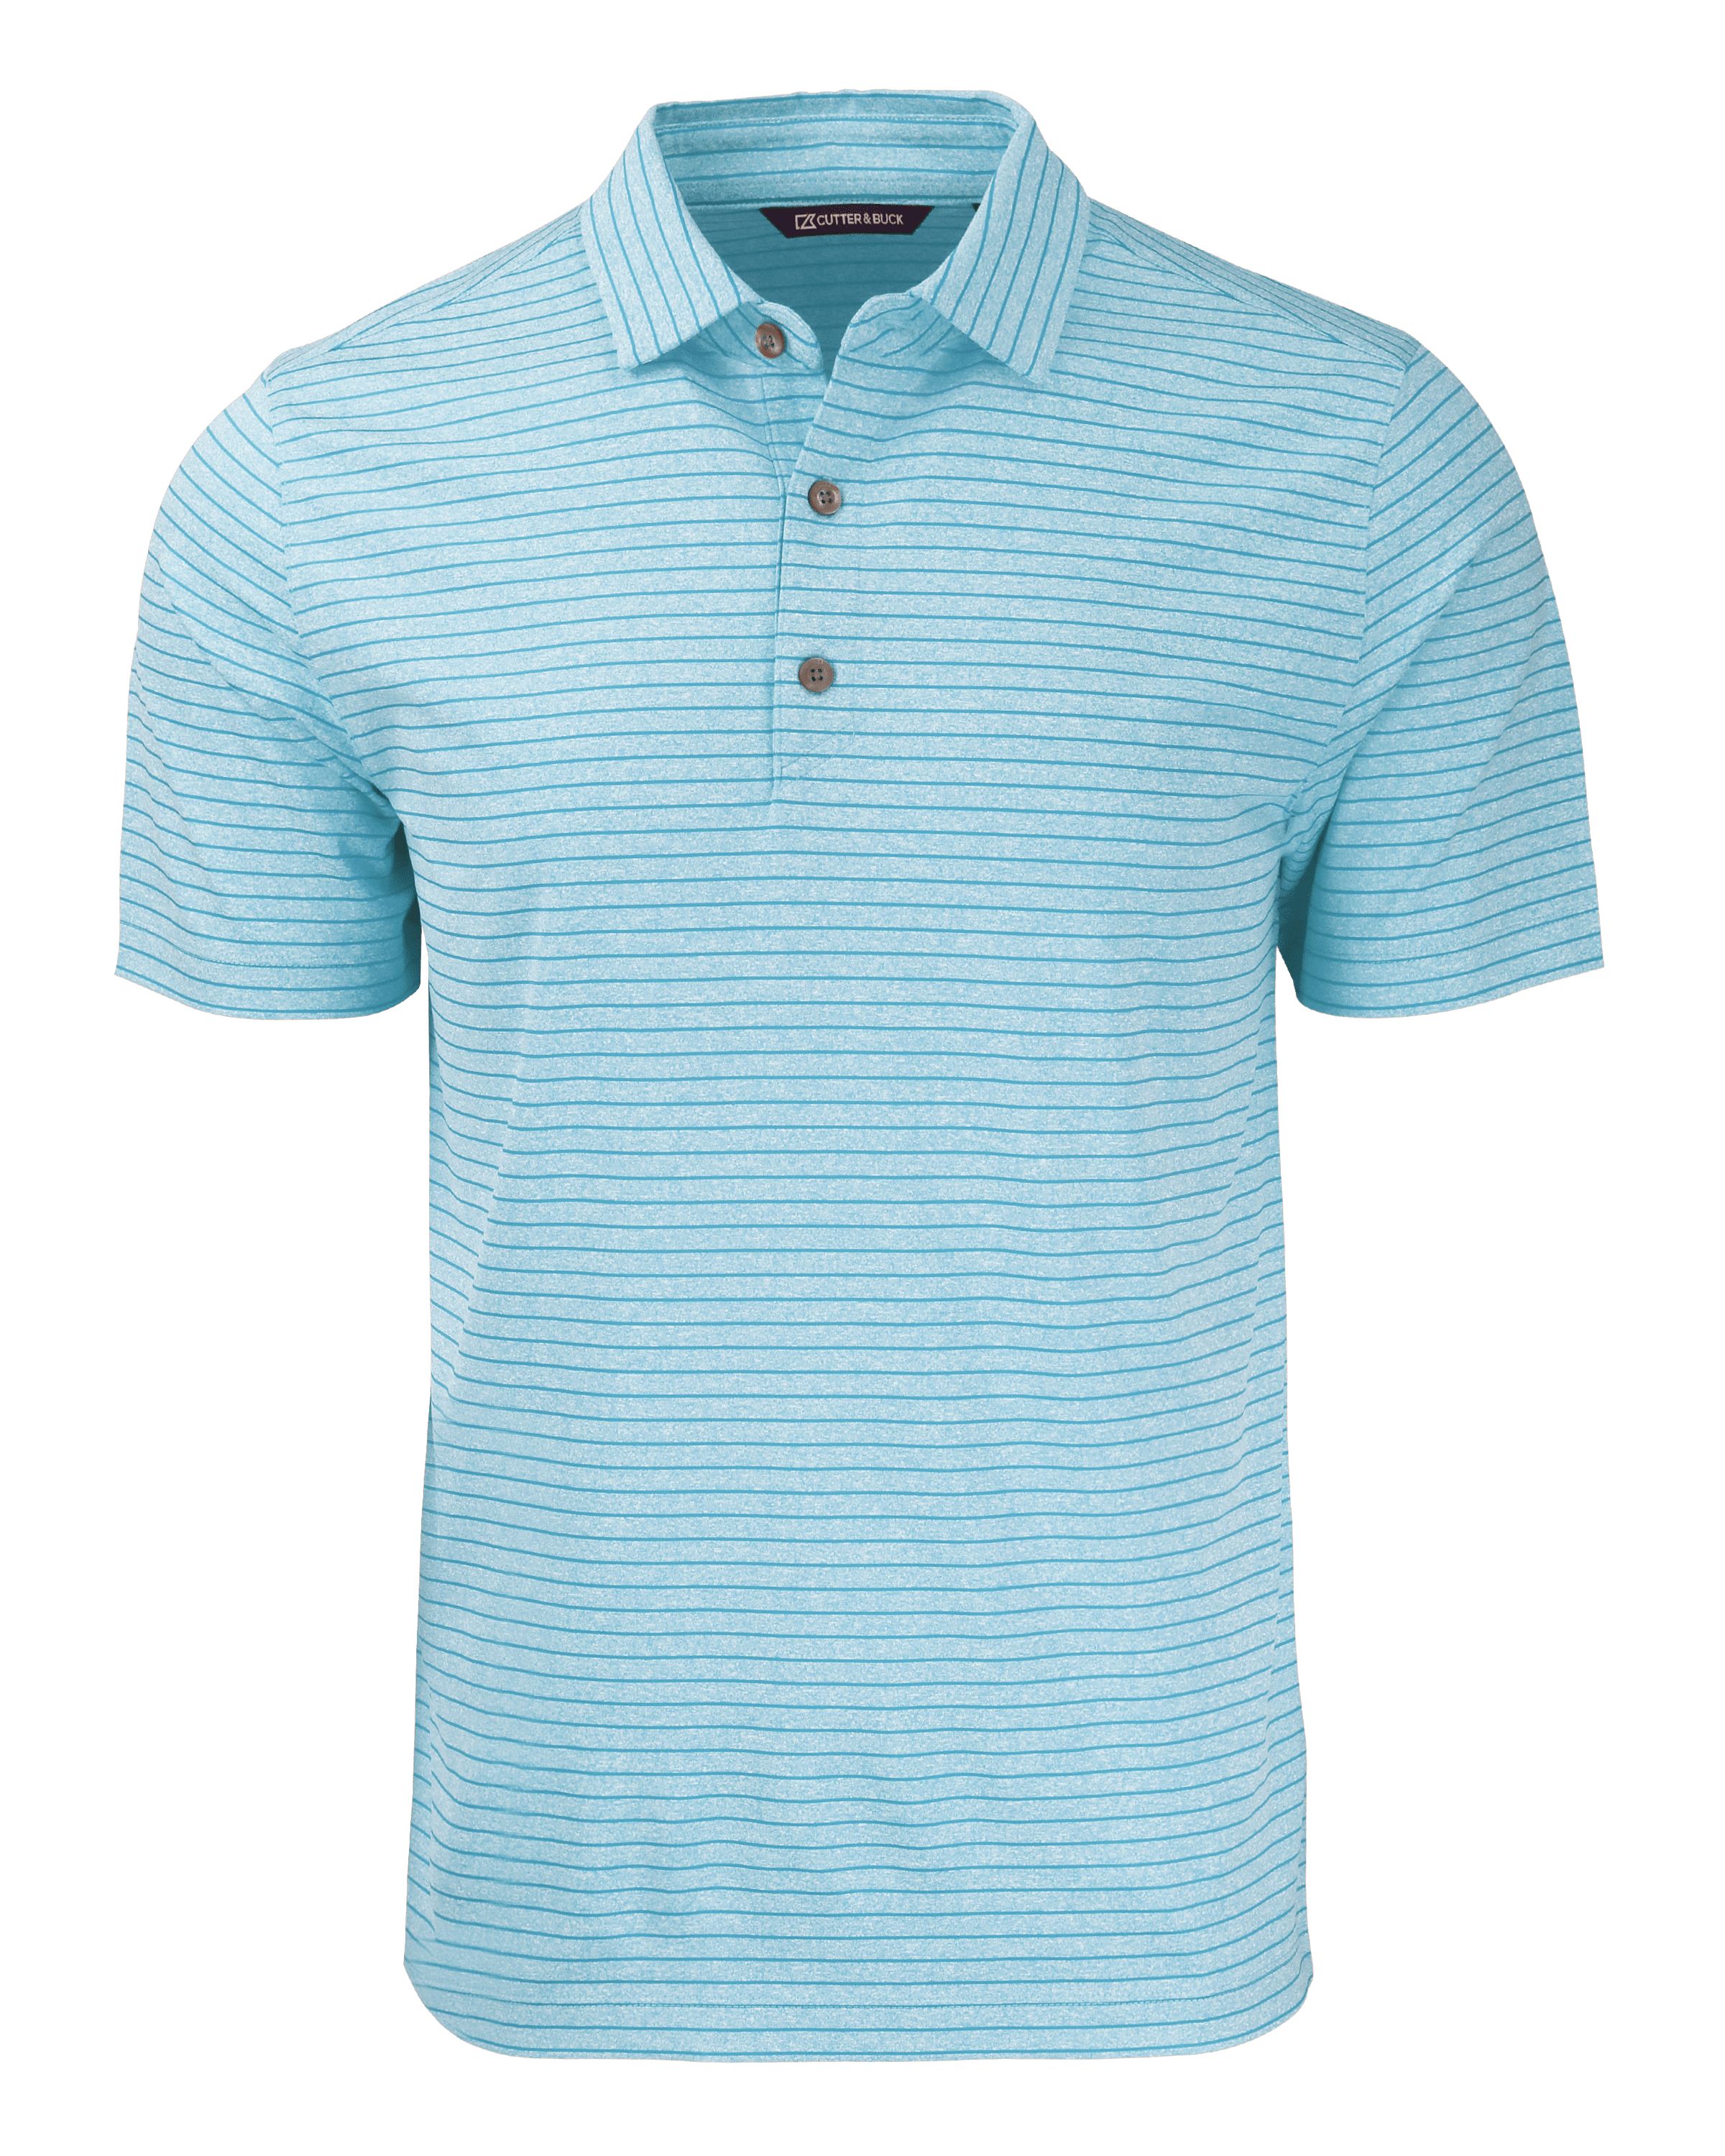 CUTTER & BUCK MCK01303 - Men's Forge Eco Heather Stripe Stretch Recycled Polo